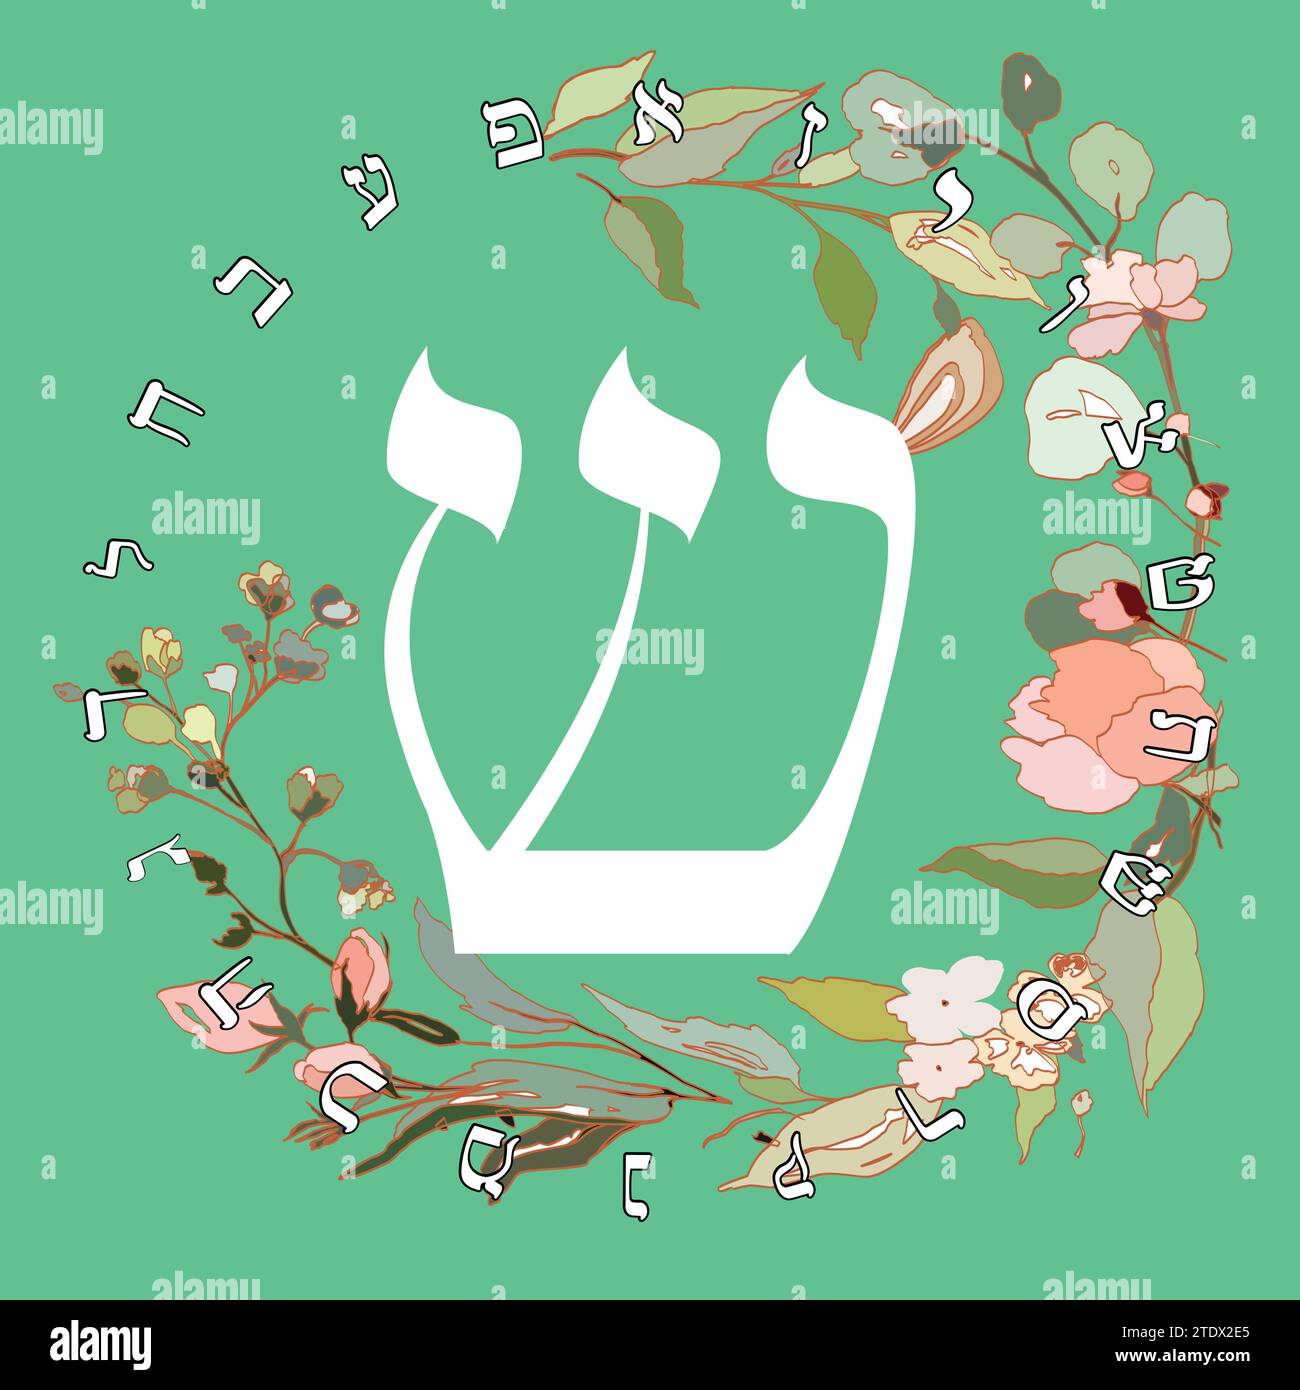 Vector illustration of the Hebrew alphabet with floral design. Hebrew letter called Shin white on green background. Stock Vector